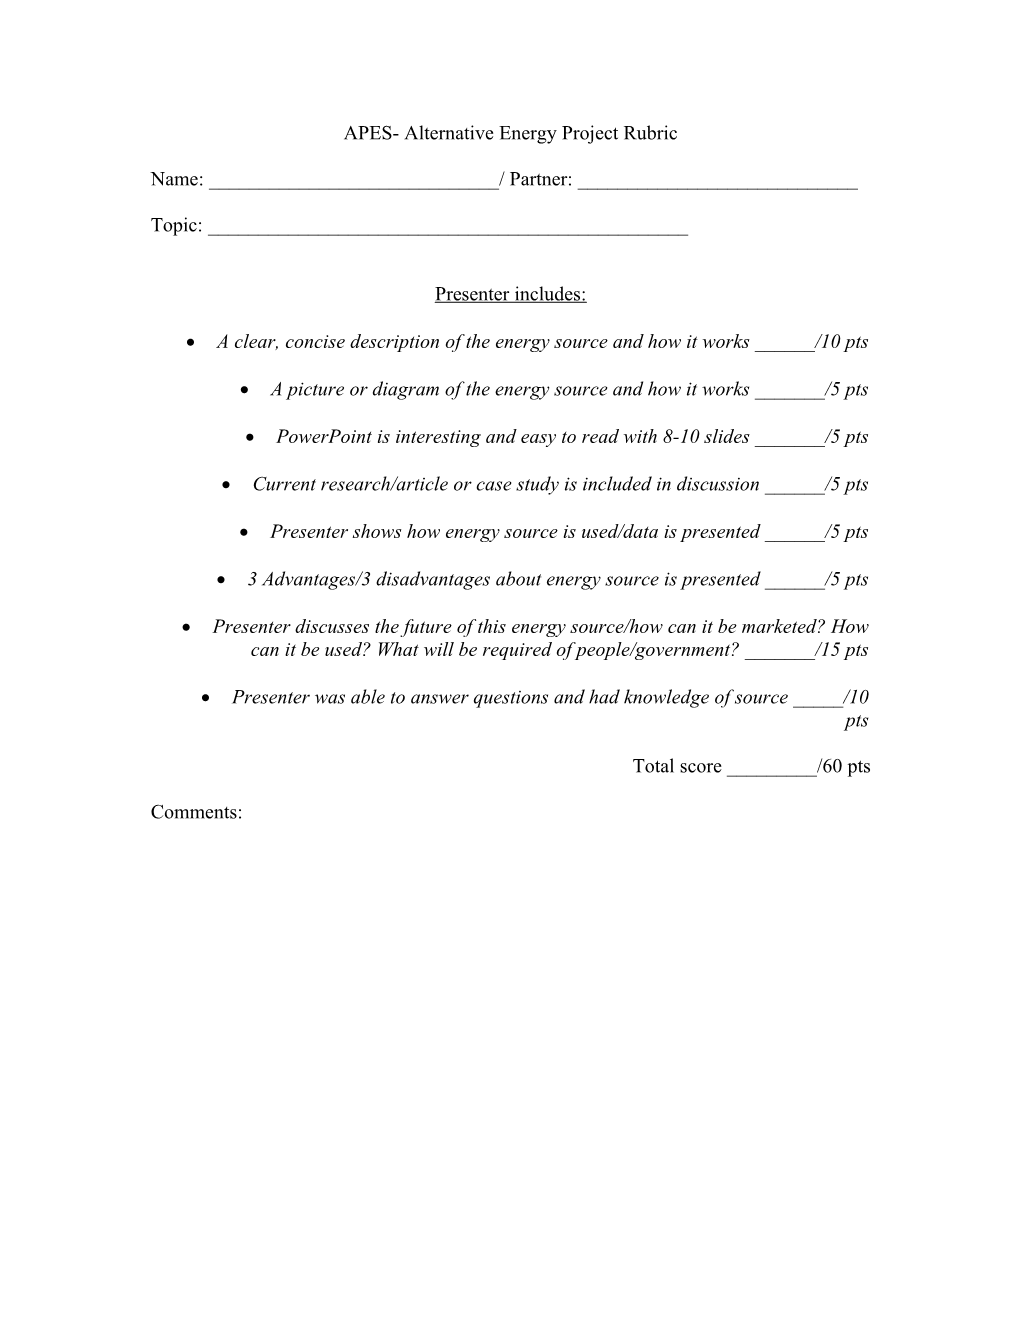 APES- Alternative Energy Project Rubric